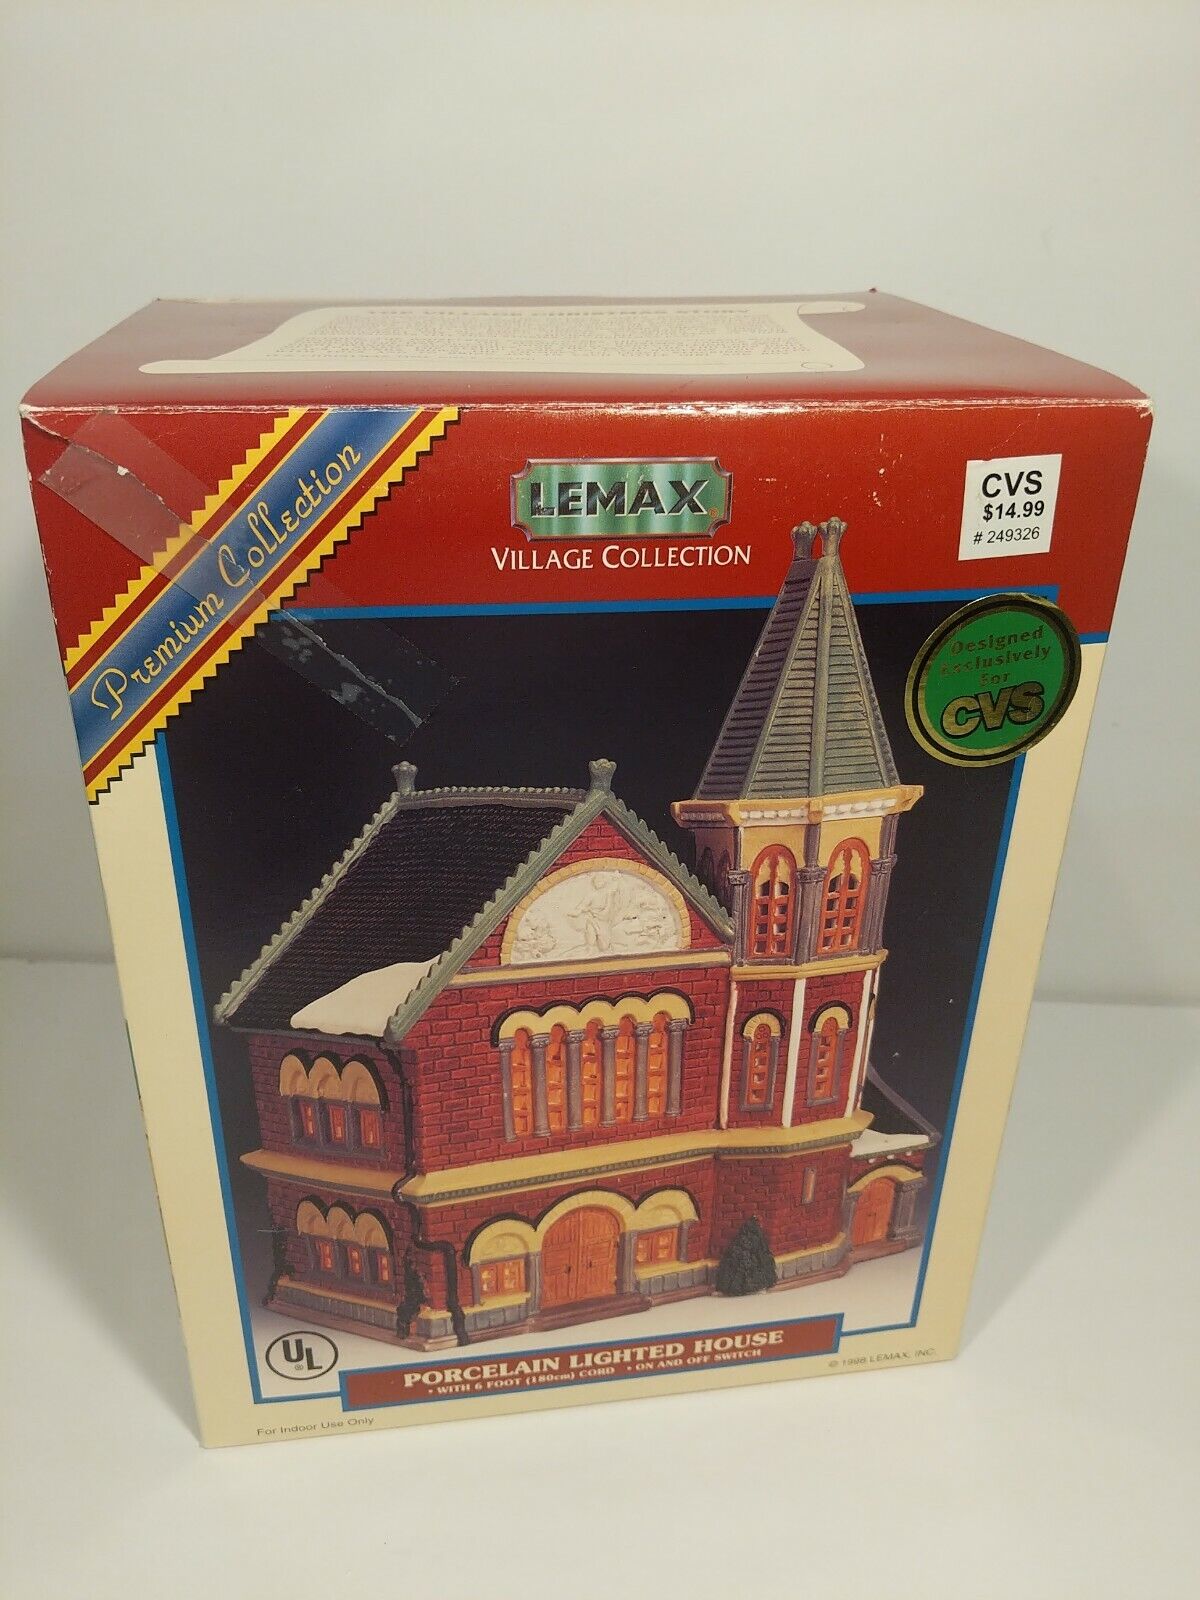 Lemax PORCELAIN LIGHTED HOUSE 1998 NIB from CVS 6ft cord on off switch